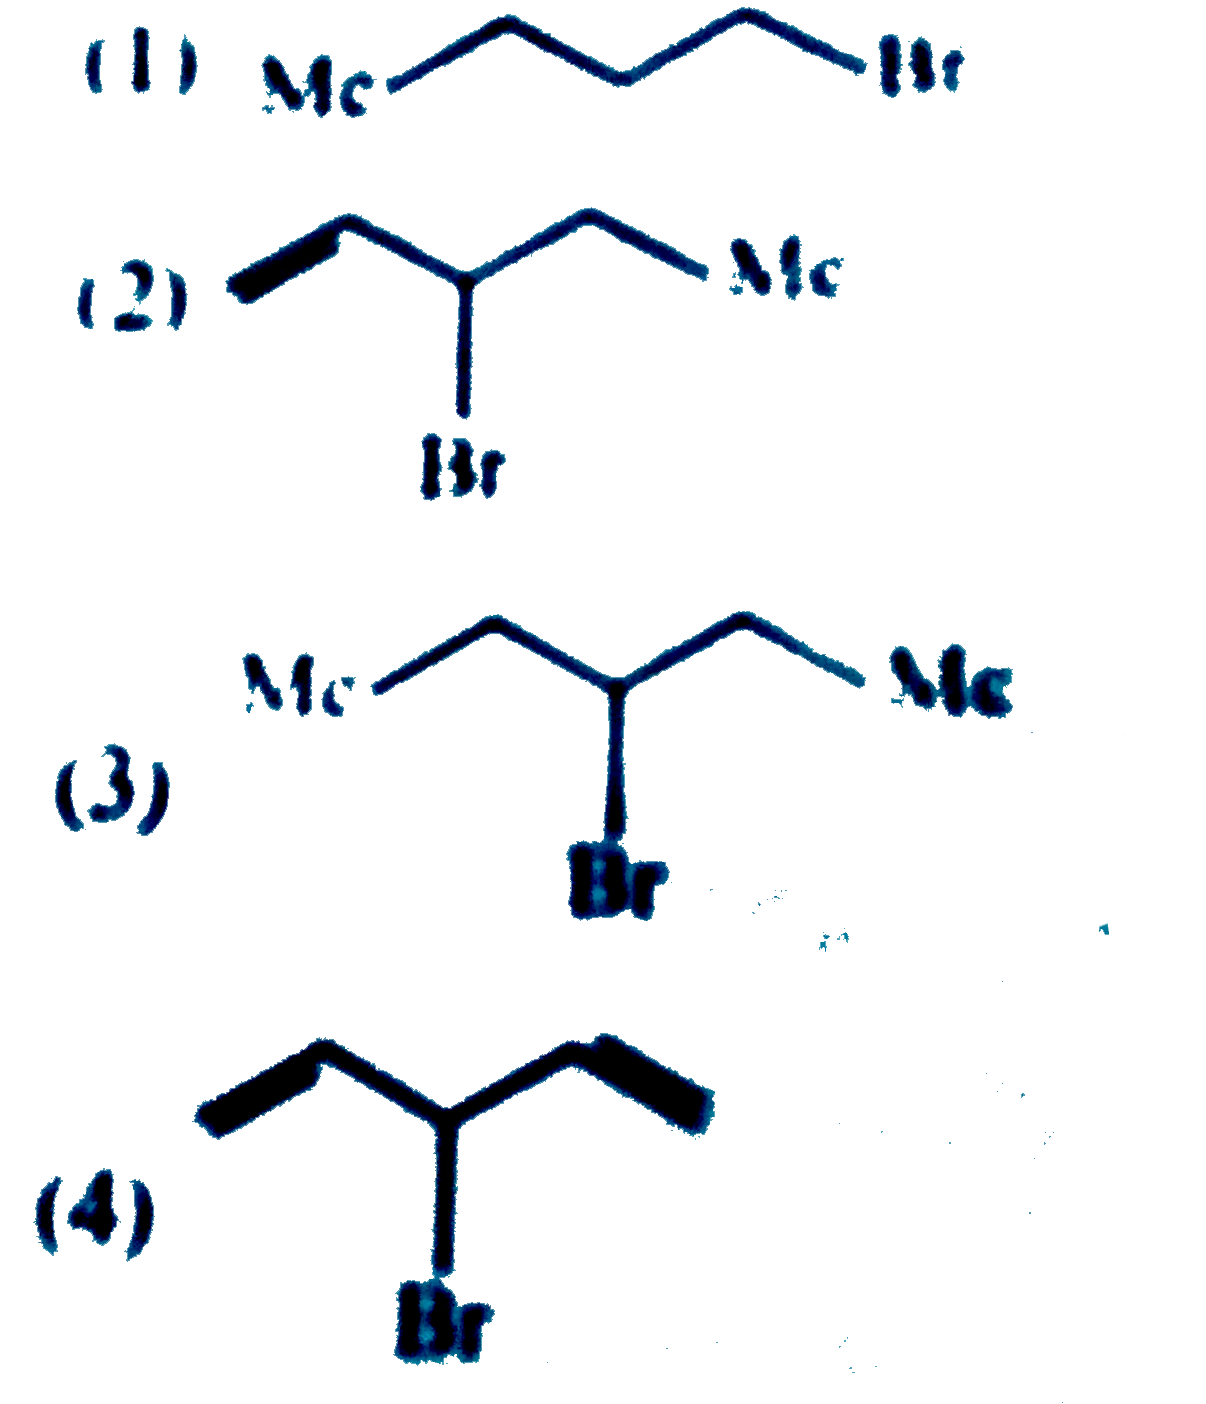 Among the following alkyl bromide correct order of S(N)1 reactivity is :